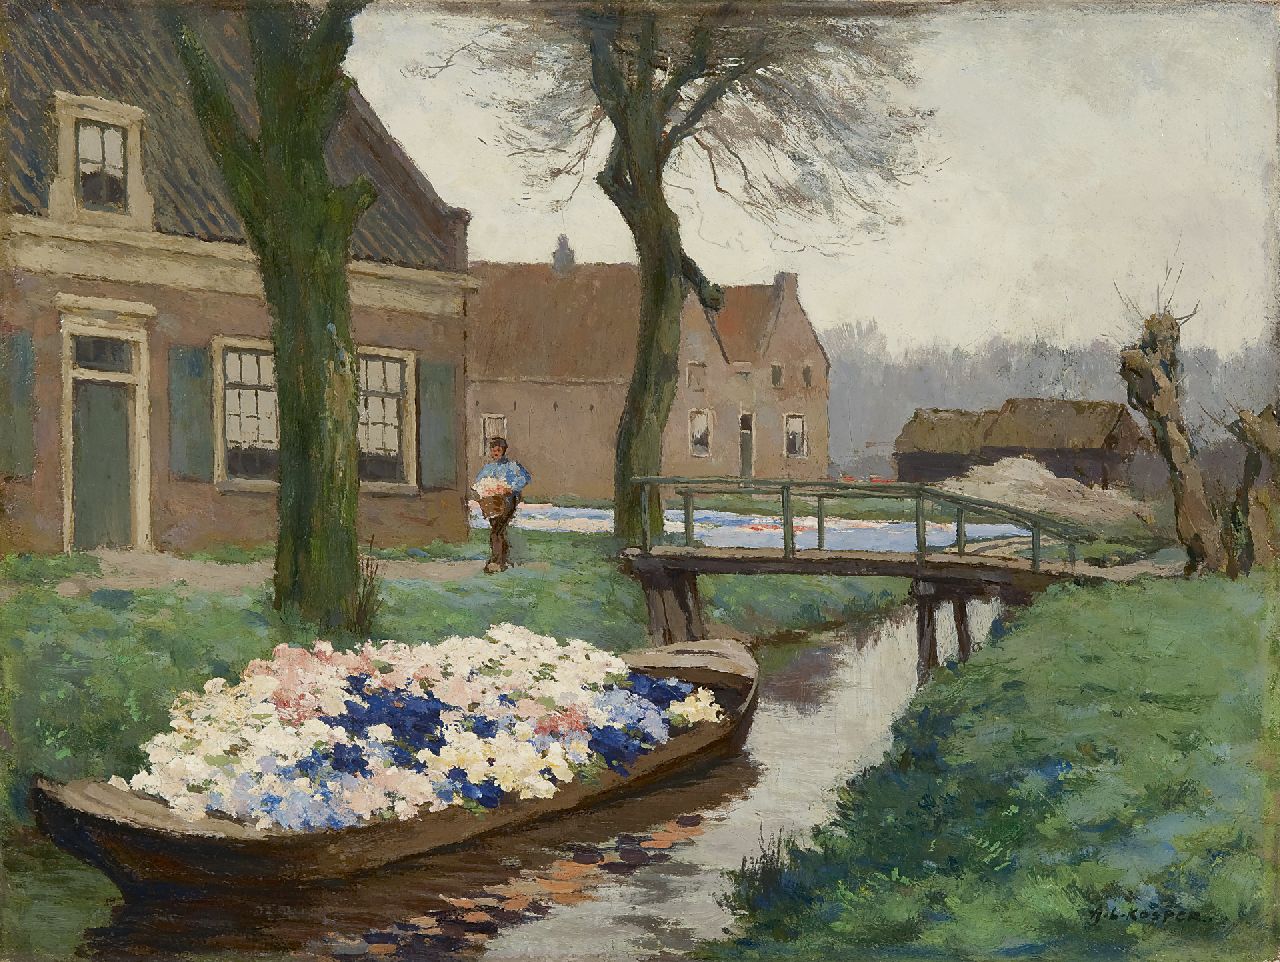 Koster A.L.  | Anton Louis 'Anton L.' Koster, Transporting Hyacinths, oil on canvas 32.5 x 43.2 cm, signed l.r.